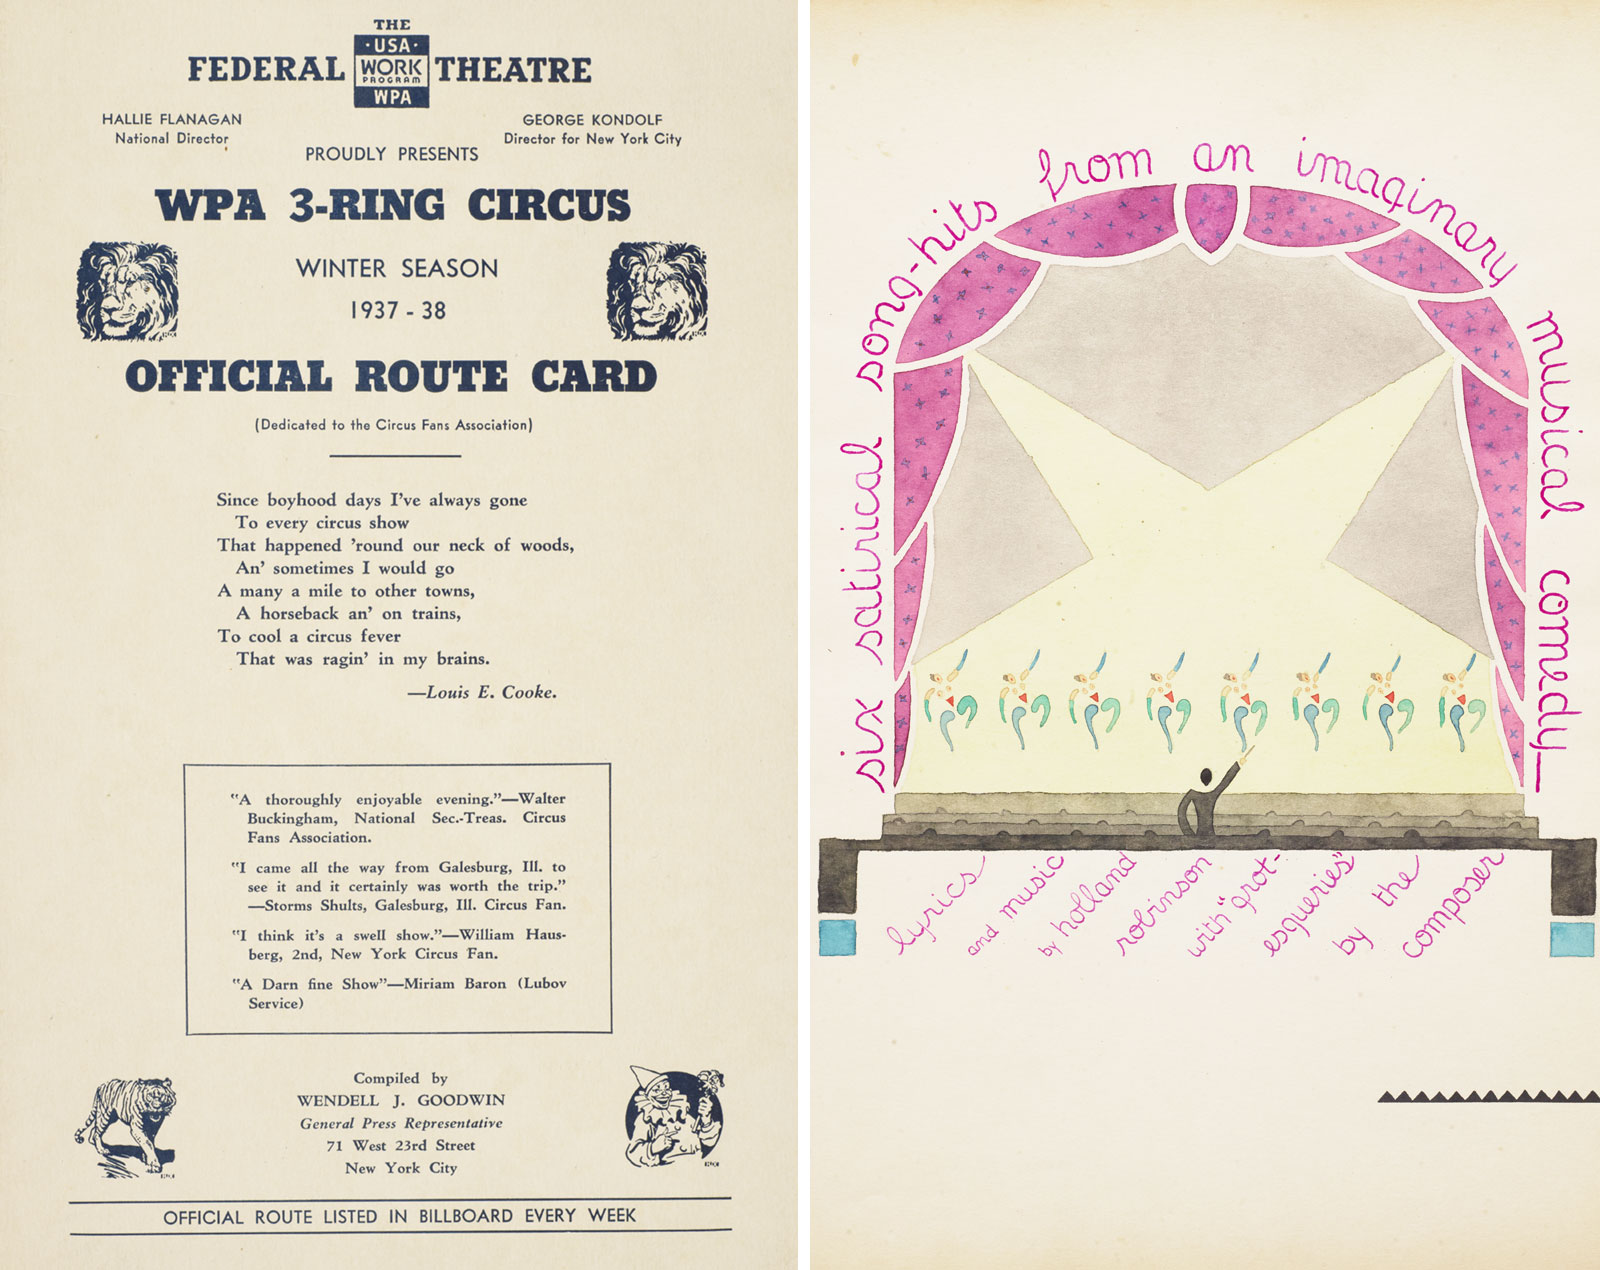 Playbill cover and manuscript illustration